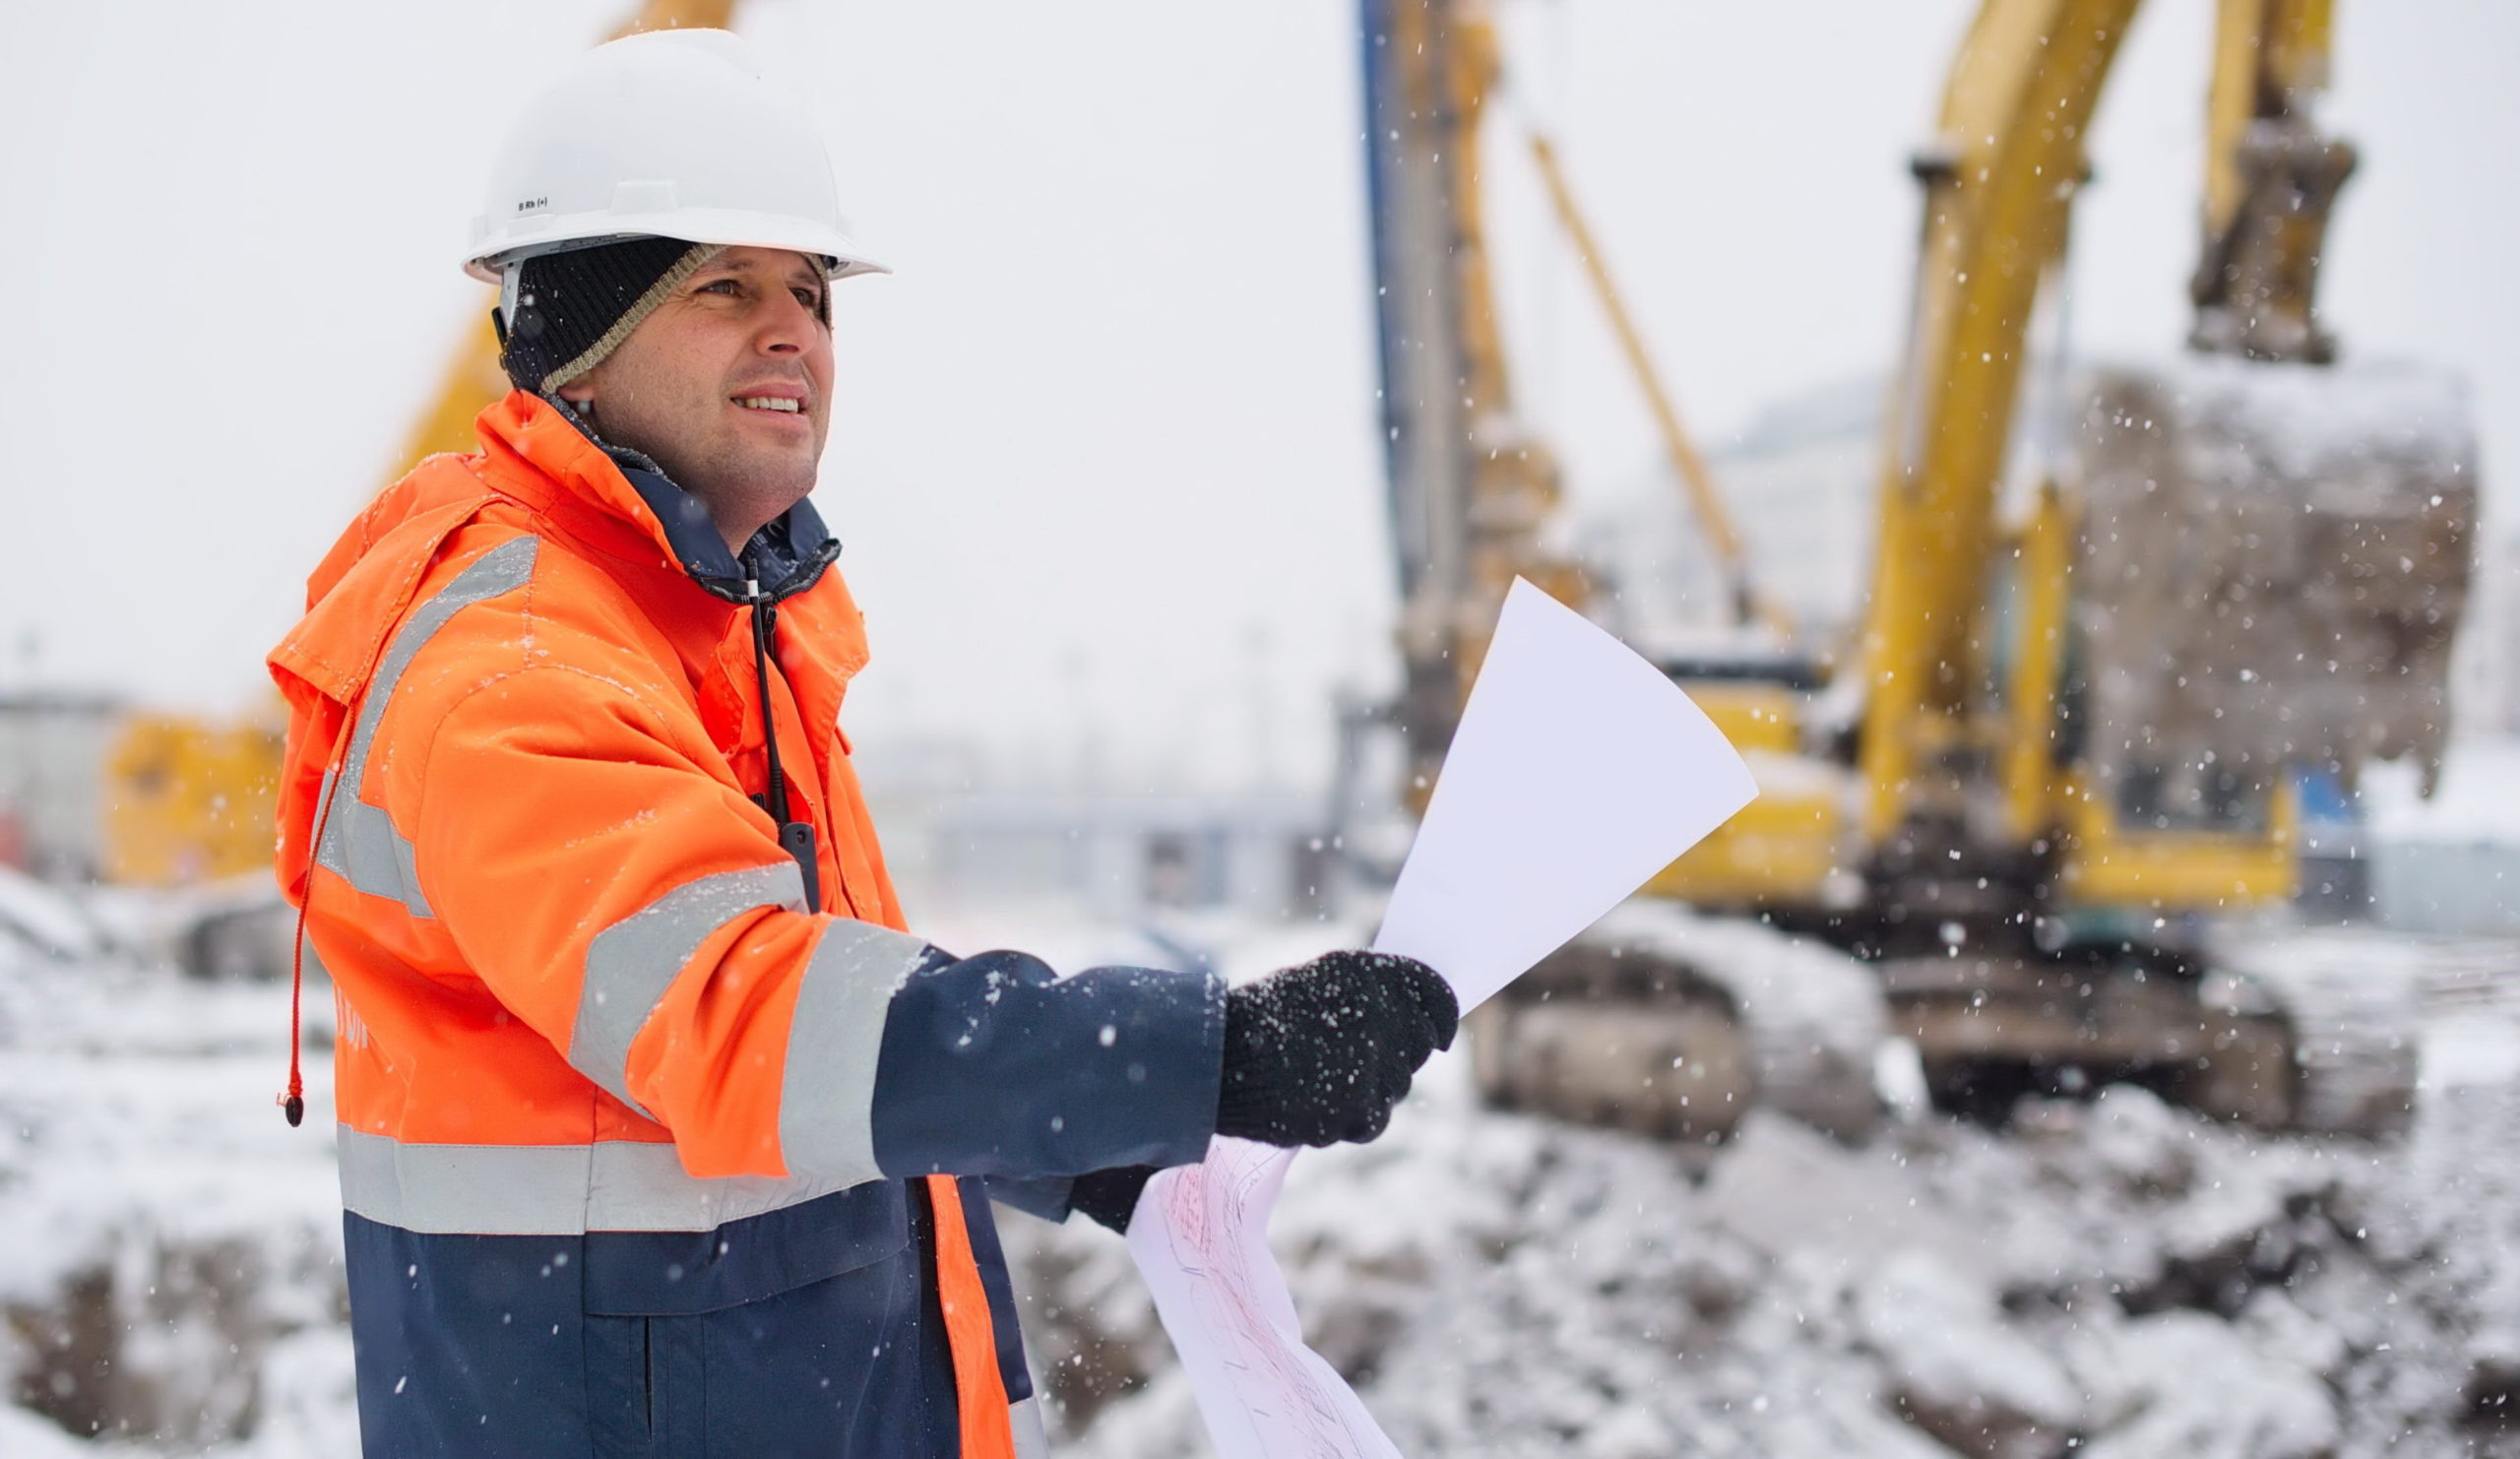 Employee working outdoors in snowy conditions